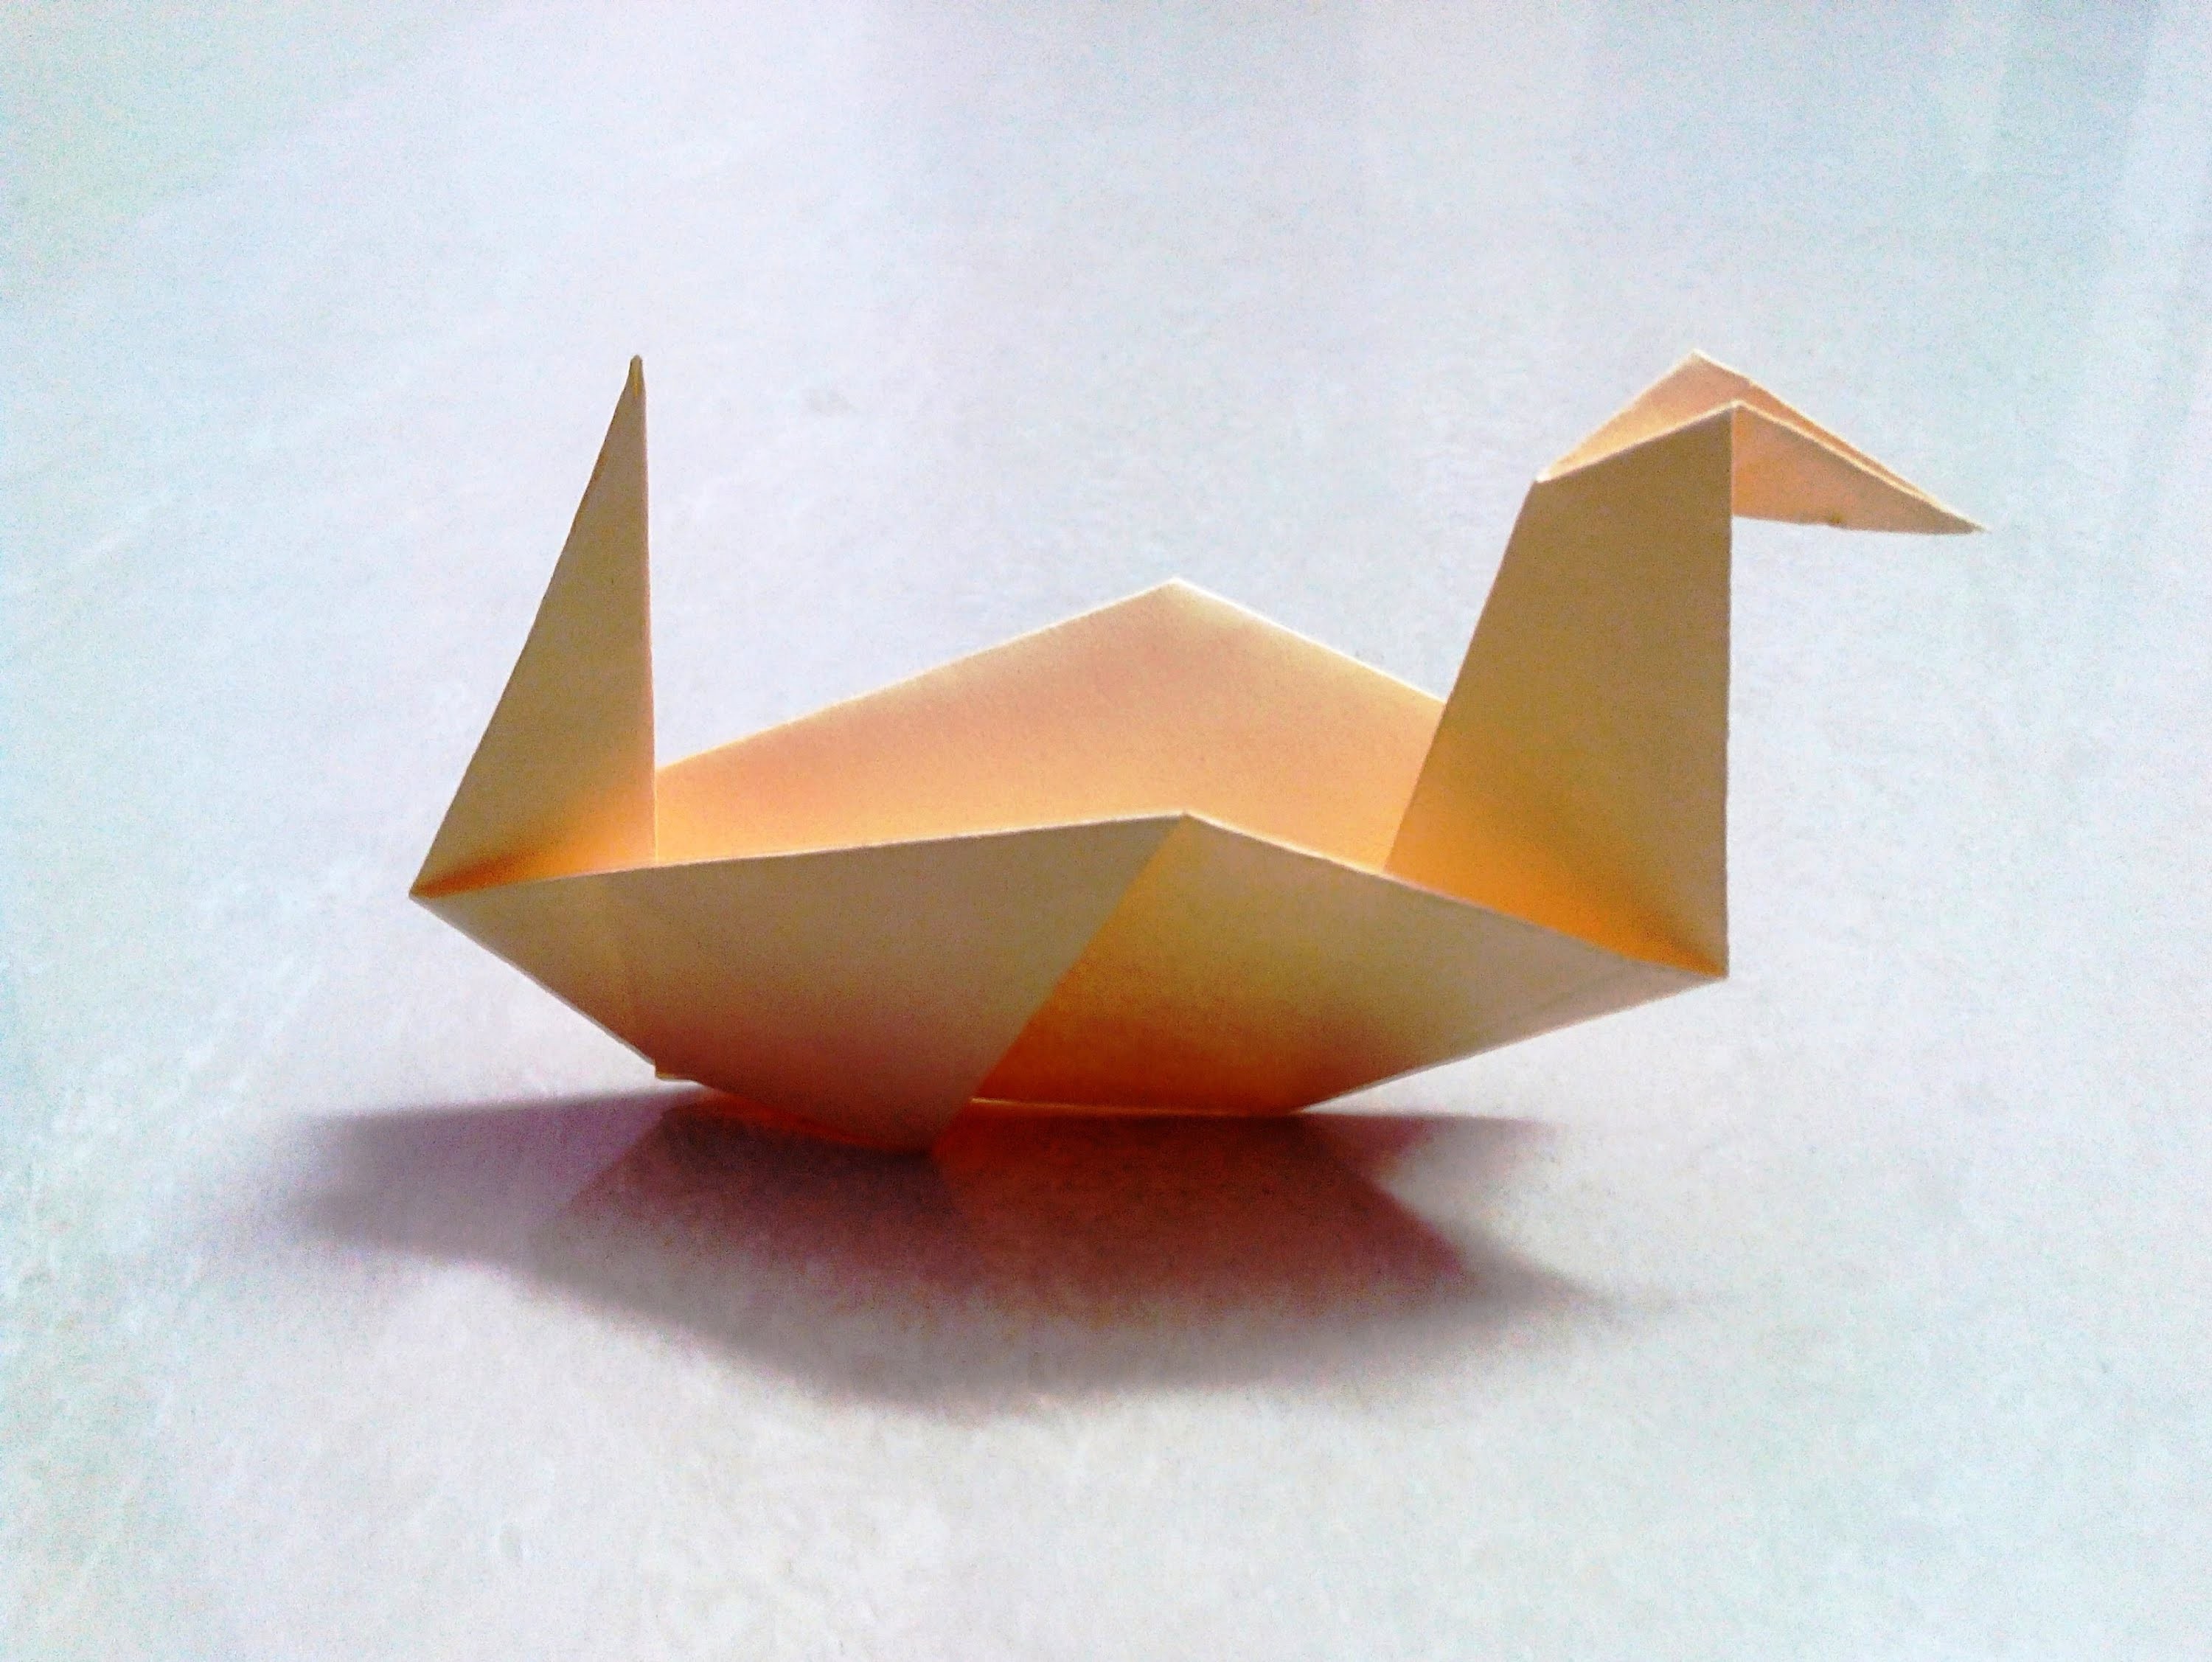 show me how to make a paper duck